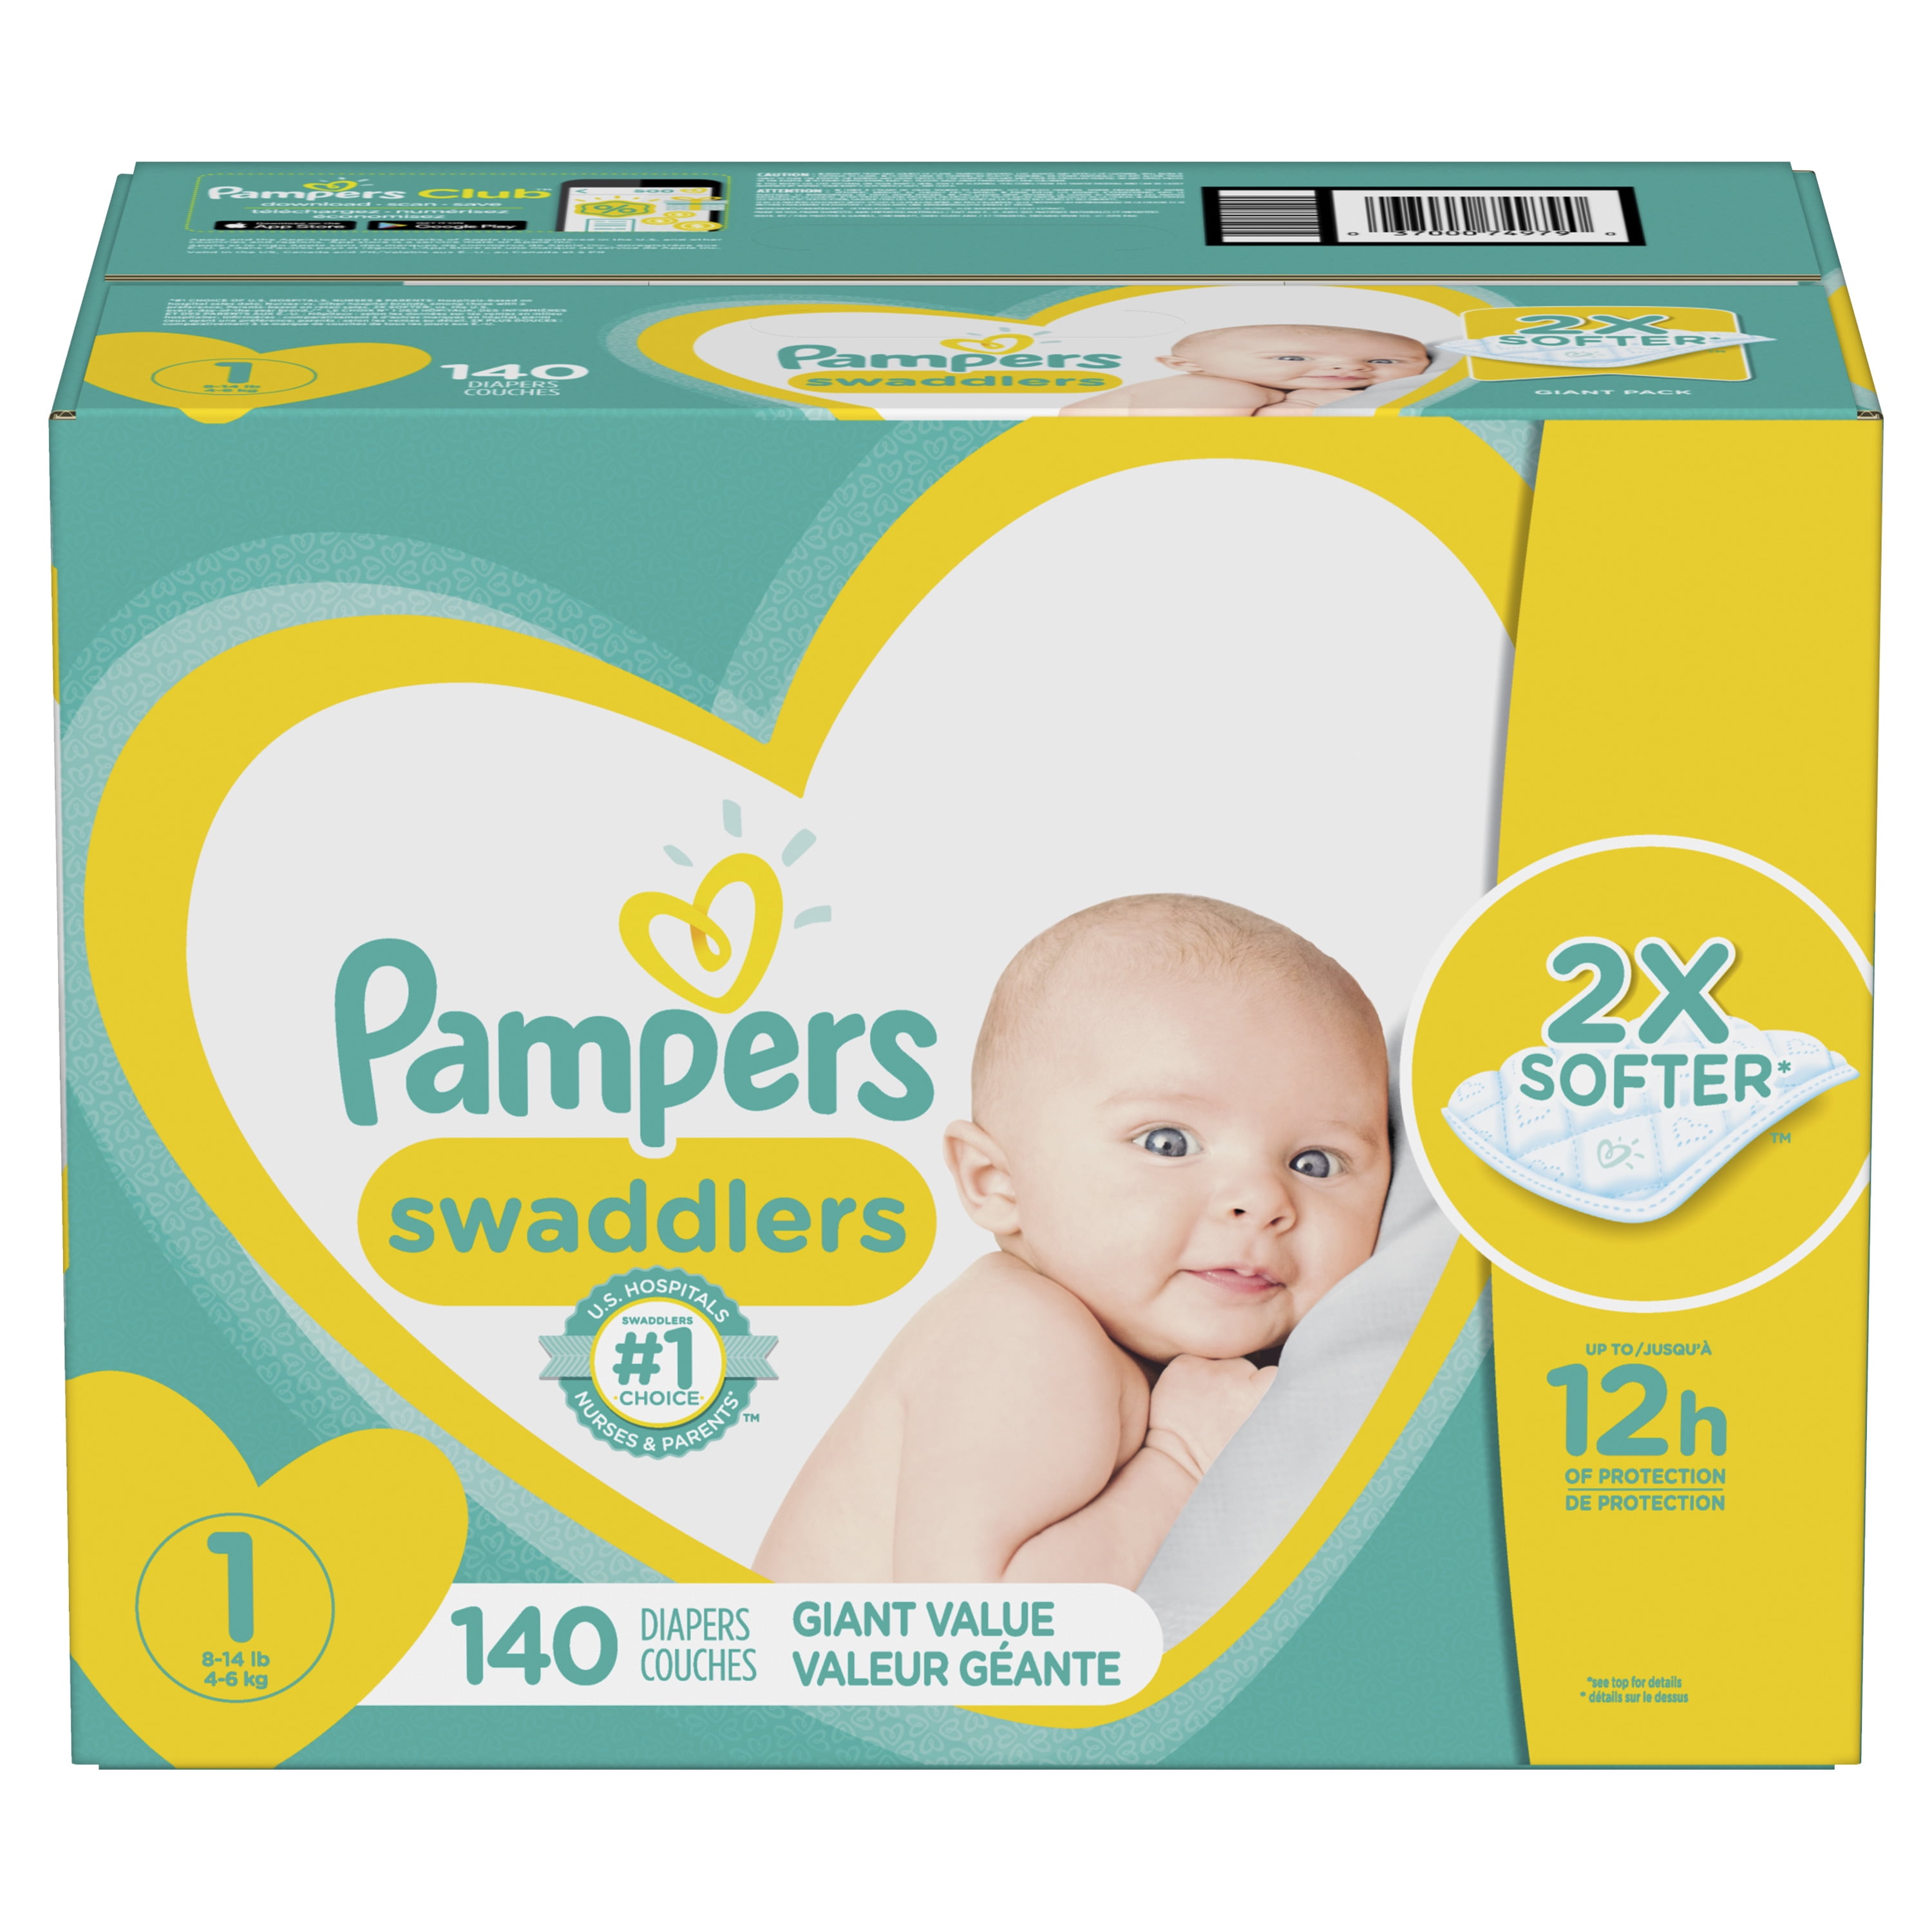 Pampers swaddlers couches taille 1 paquet jumbo, swaddlers (32 un